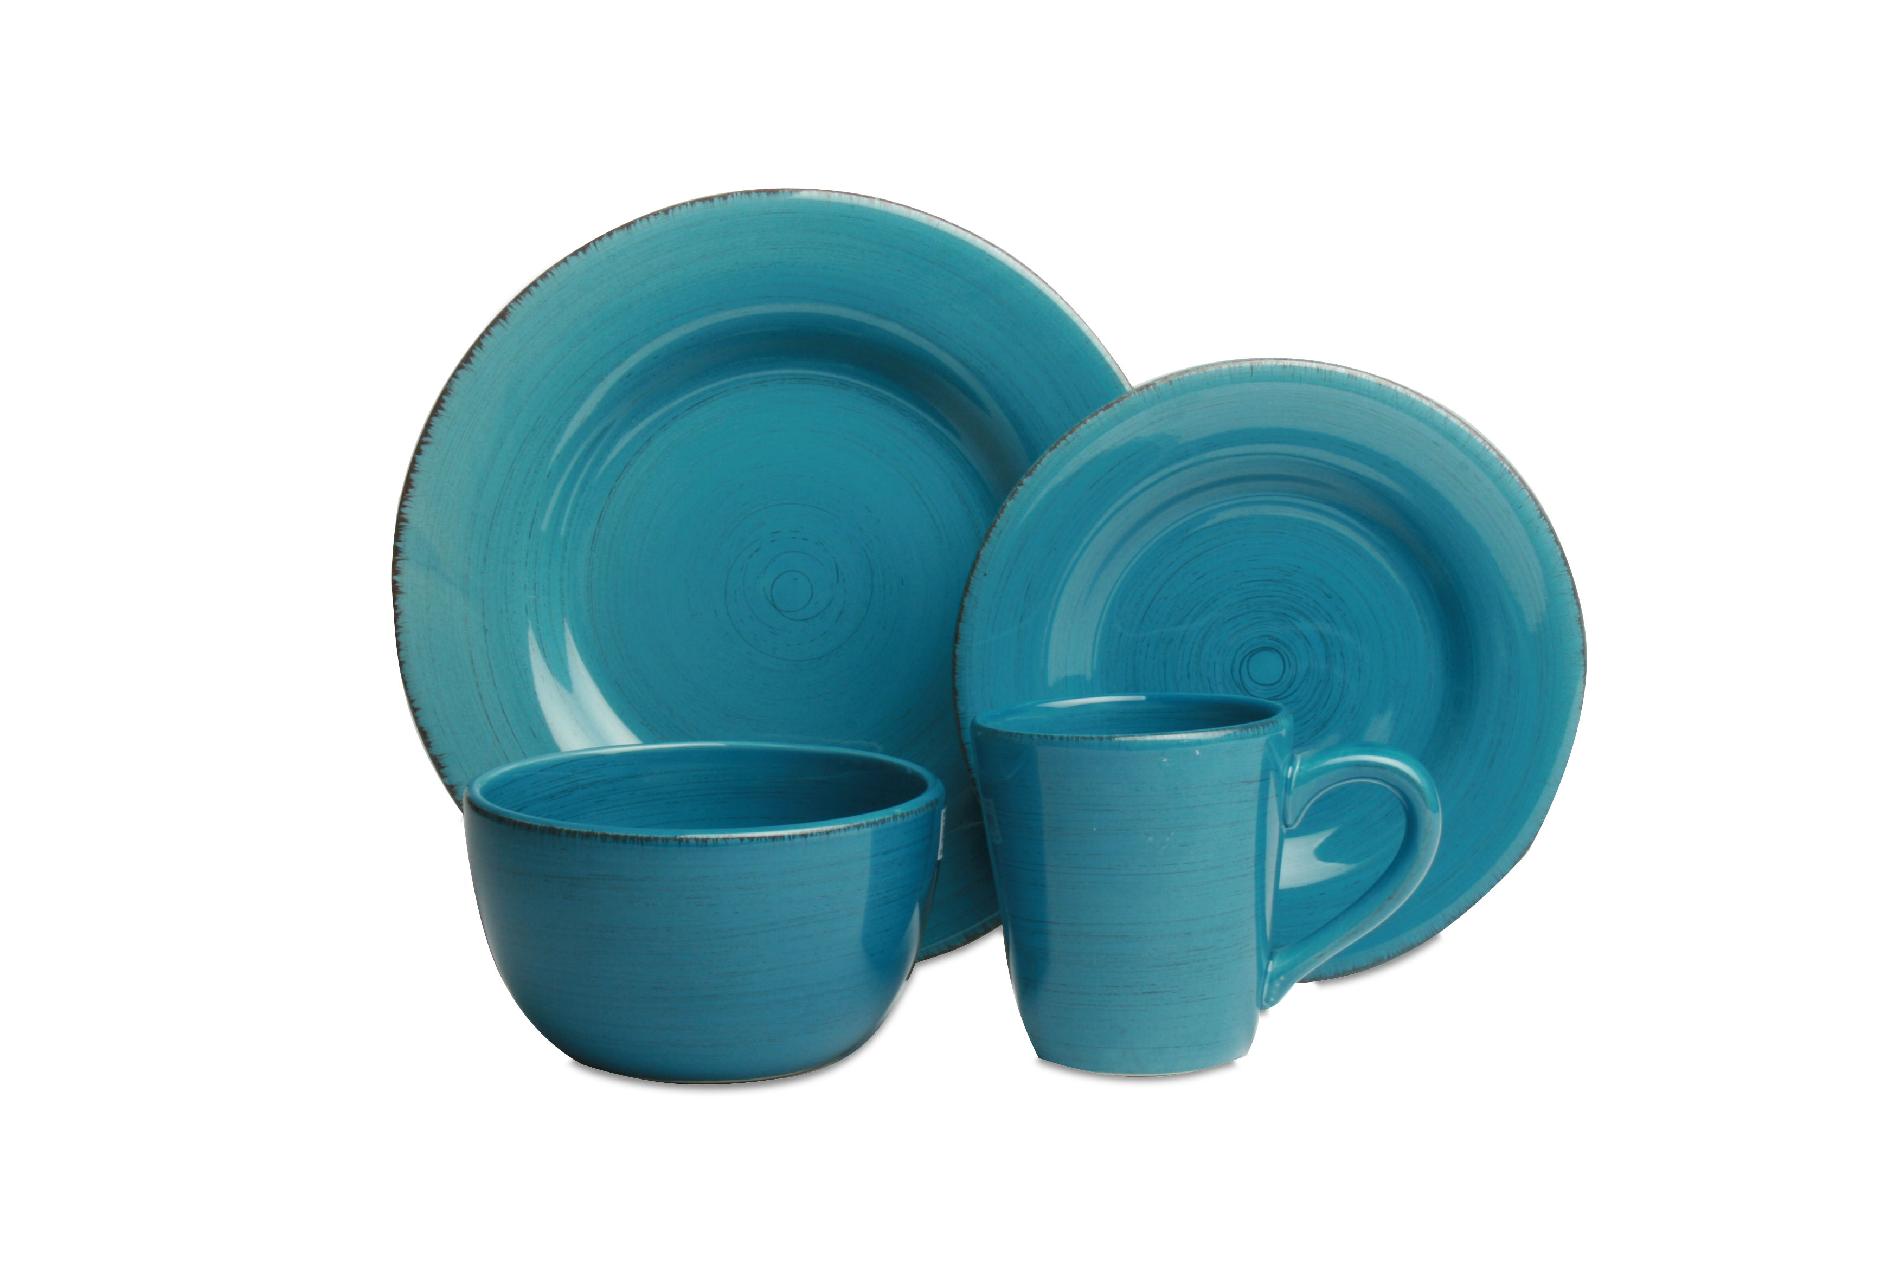 SONOMA TURQUOISE DINNERWARE COLLECTION SET of 16